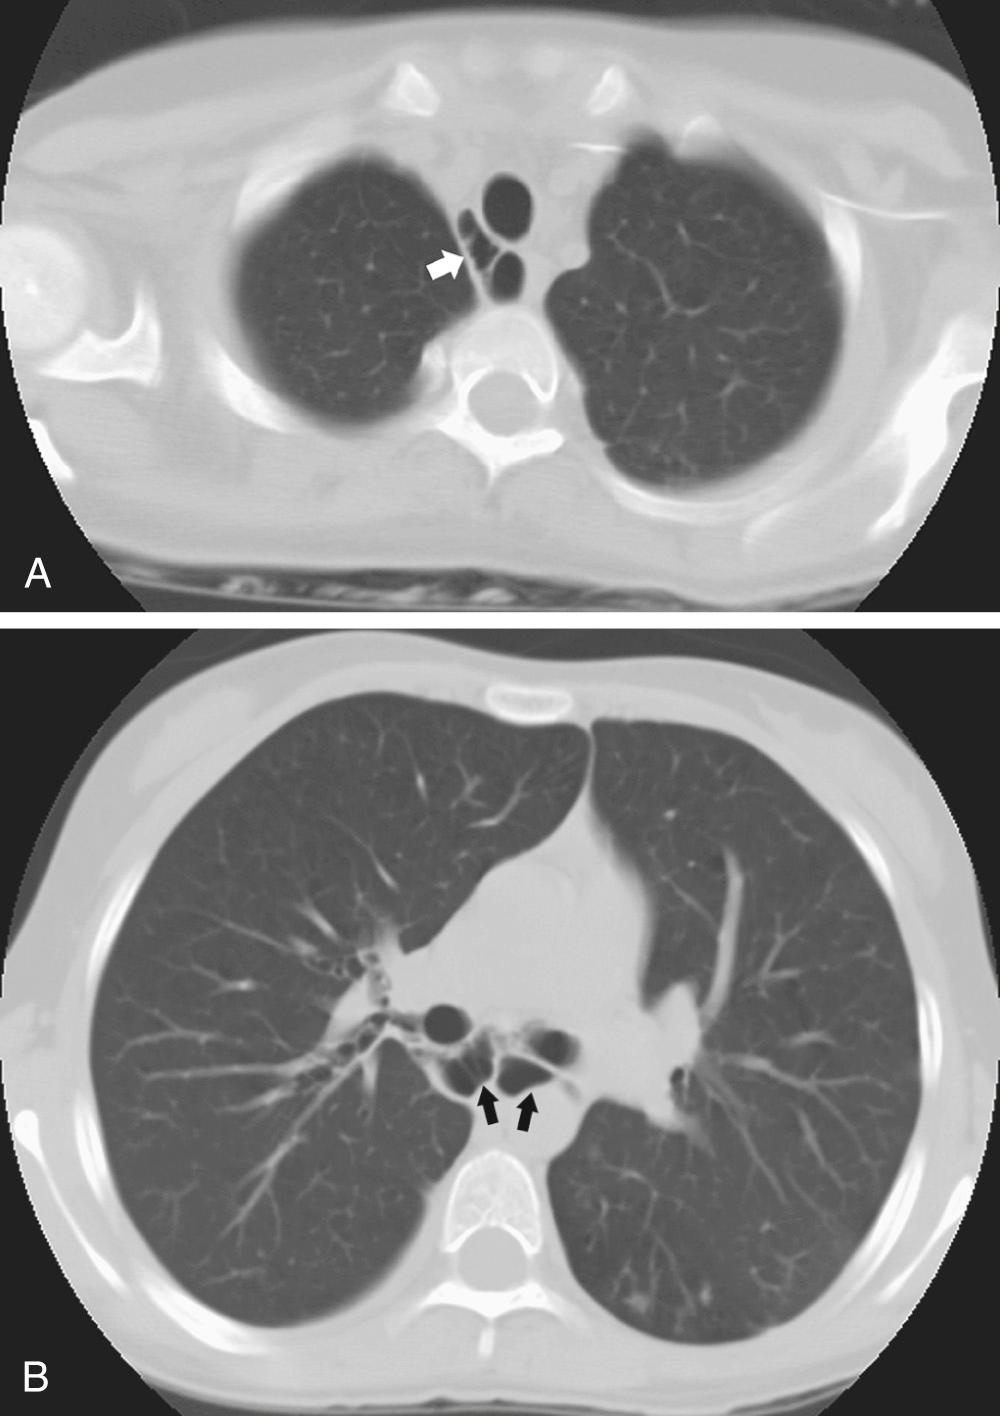 FIGURE 9-6, Tracheobronchomegaly (Mounier-Kuhn syndrome) in a 13-year-old girl with chronic cough and bronchiectasis. Computed tomography scan at the level of the trachea (A) and mainstem bronchi (B) shows air-filled saccules (arrows) around the airway from chronic inflammation destroying the normal elastic properties of the tracheobronchial tree and its smooth muscles.